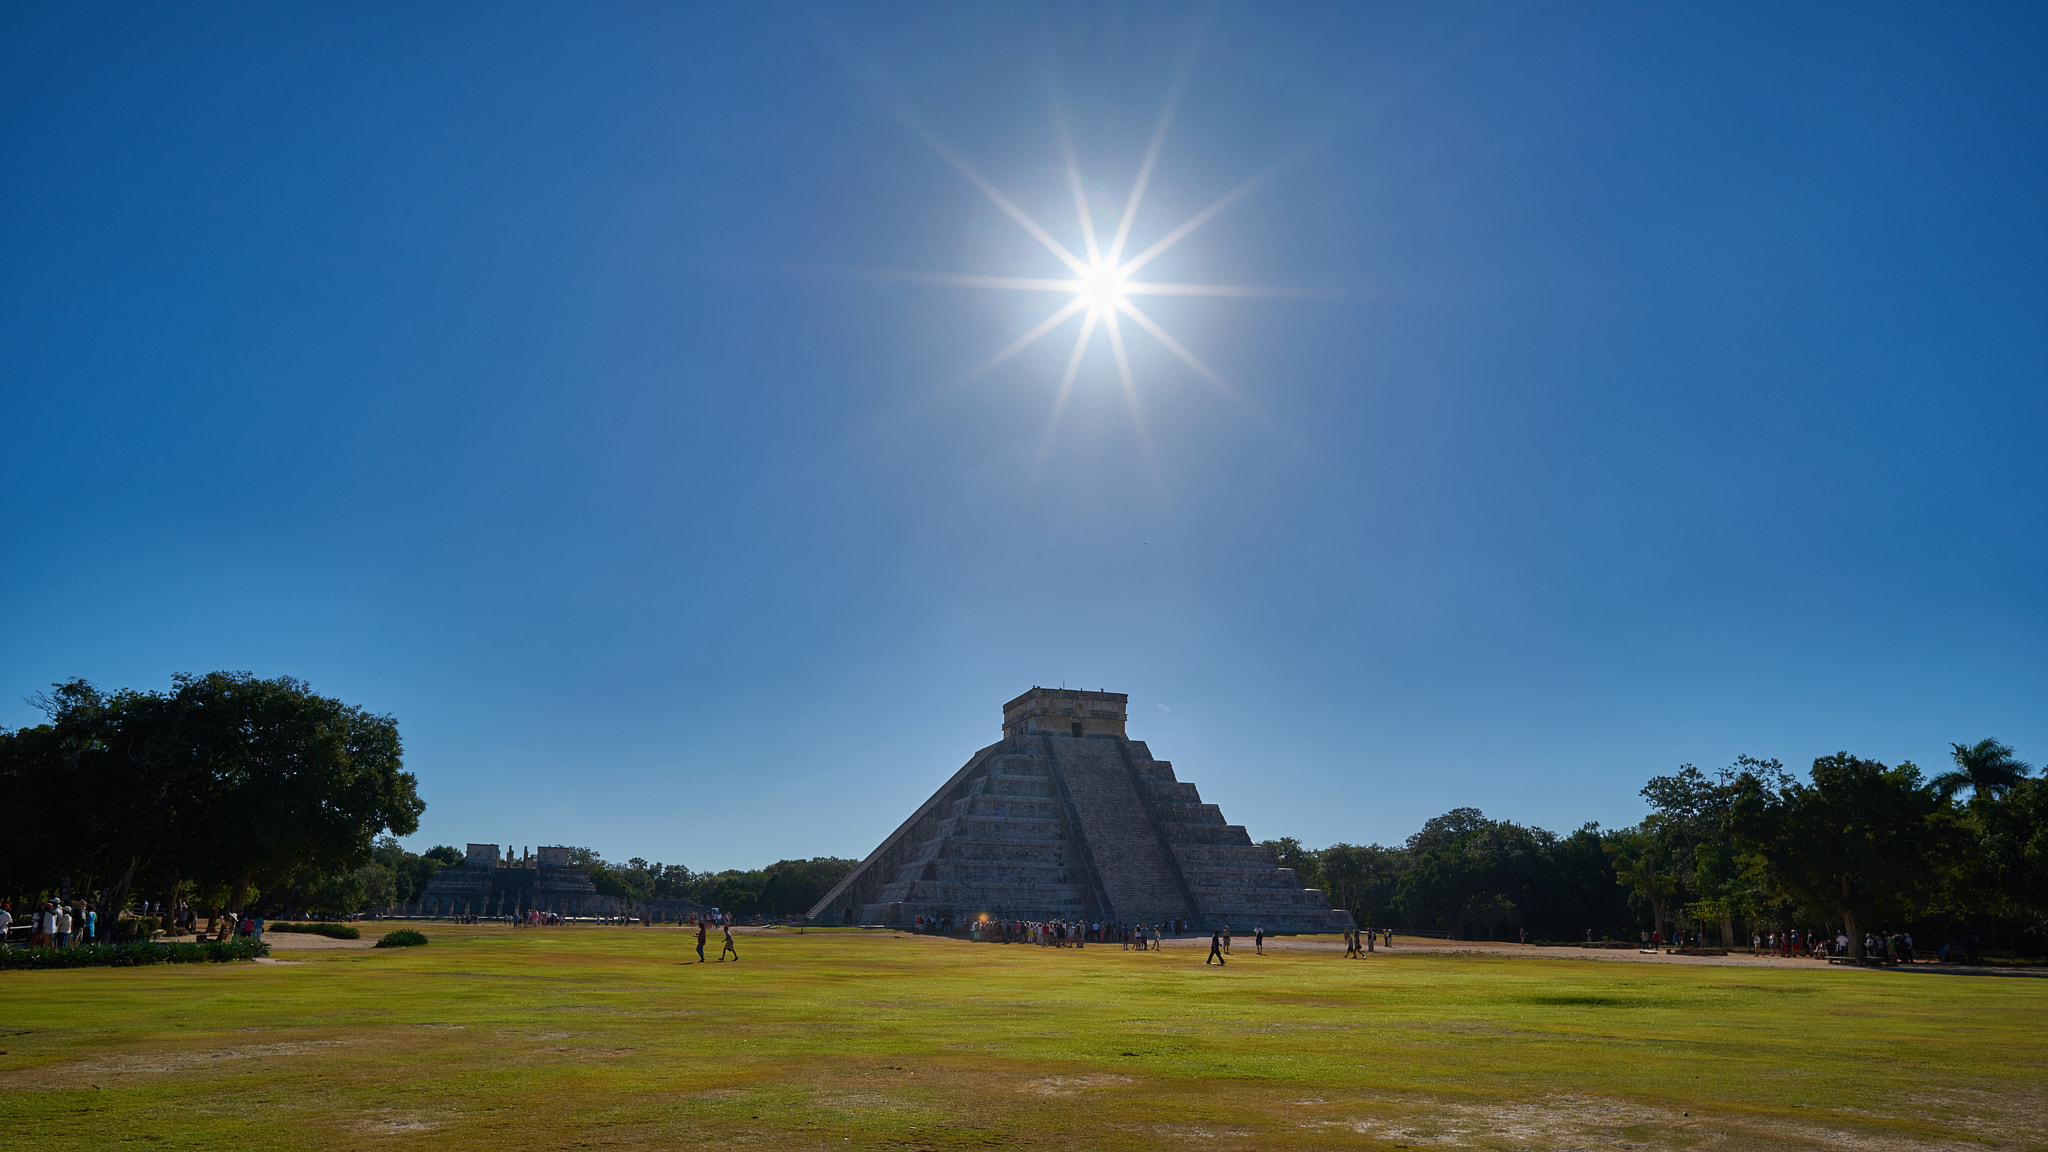 ZEISS Loxia 21mm F2.8 sample photo. Sunstar over chichen itza photography